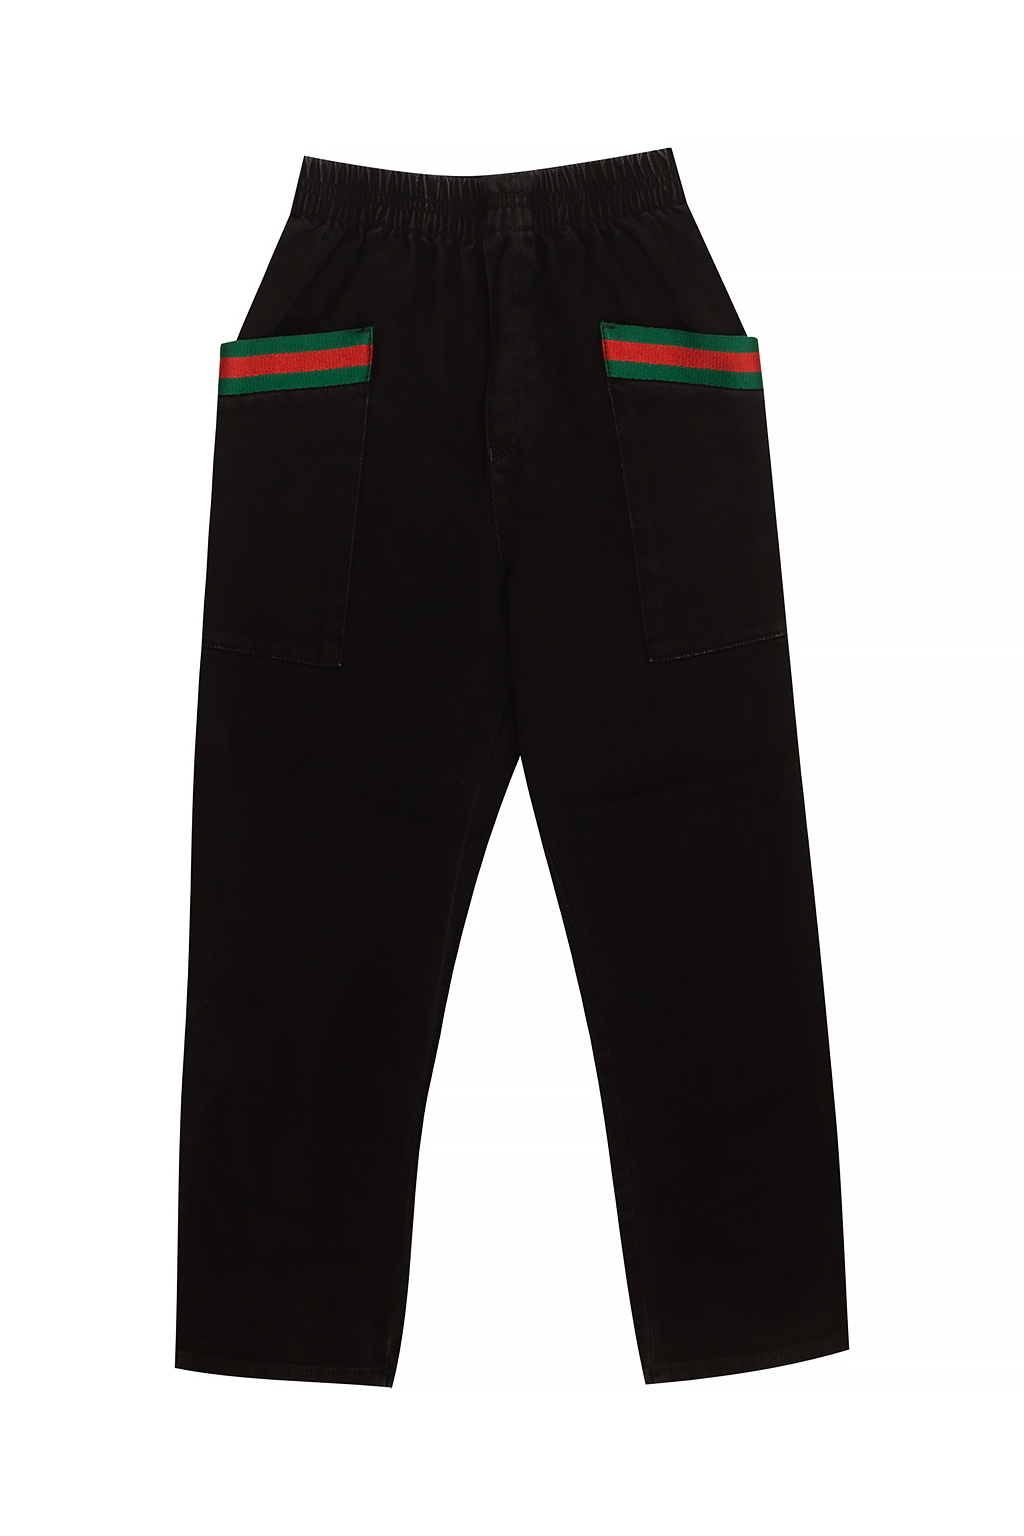 Gucci Kids Jeans with Web stripes